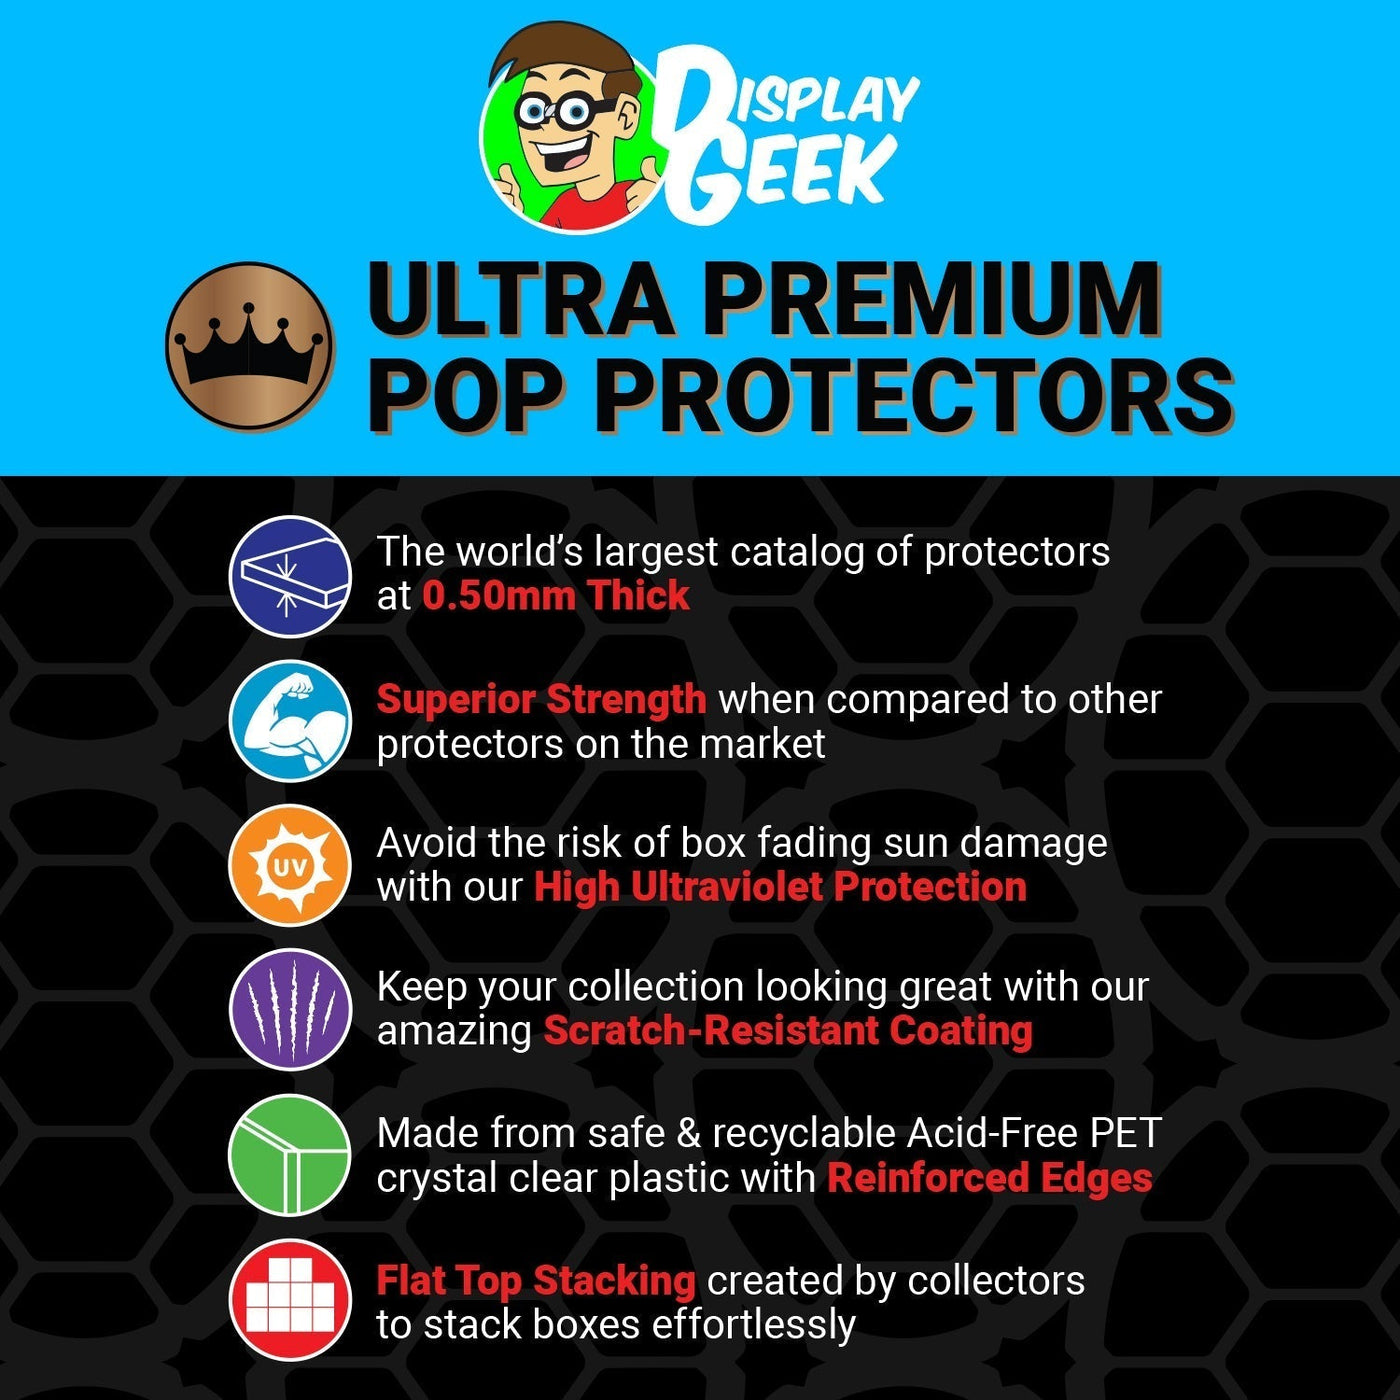 Pop Protector for 2 Pack SS Kale & SS Caulifla Funko Pop on The Protector Guide App by Display Geek